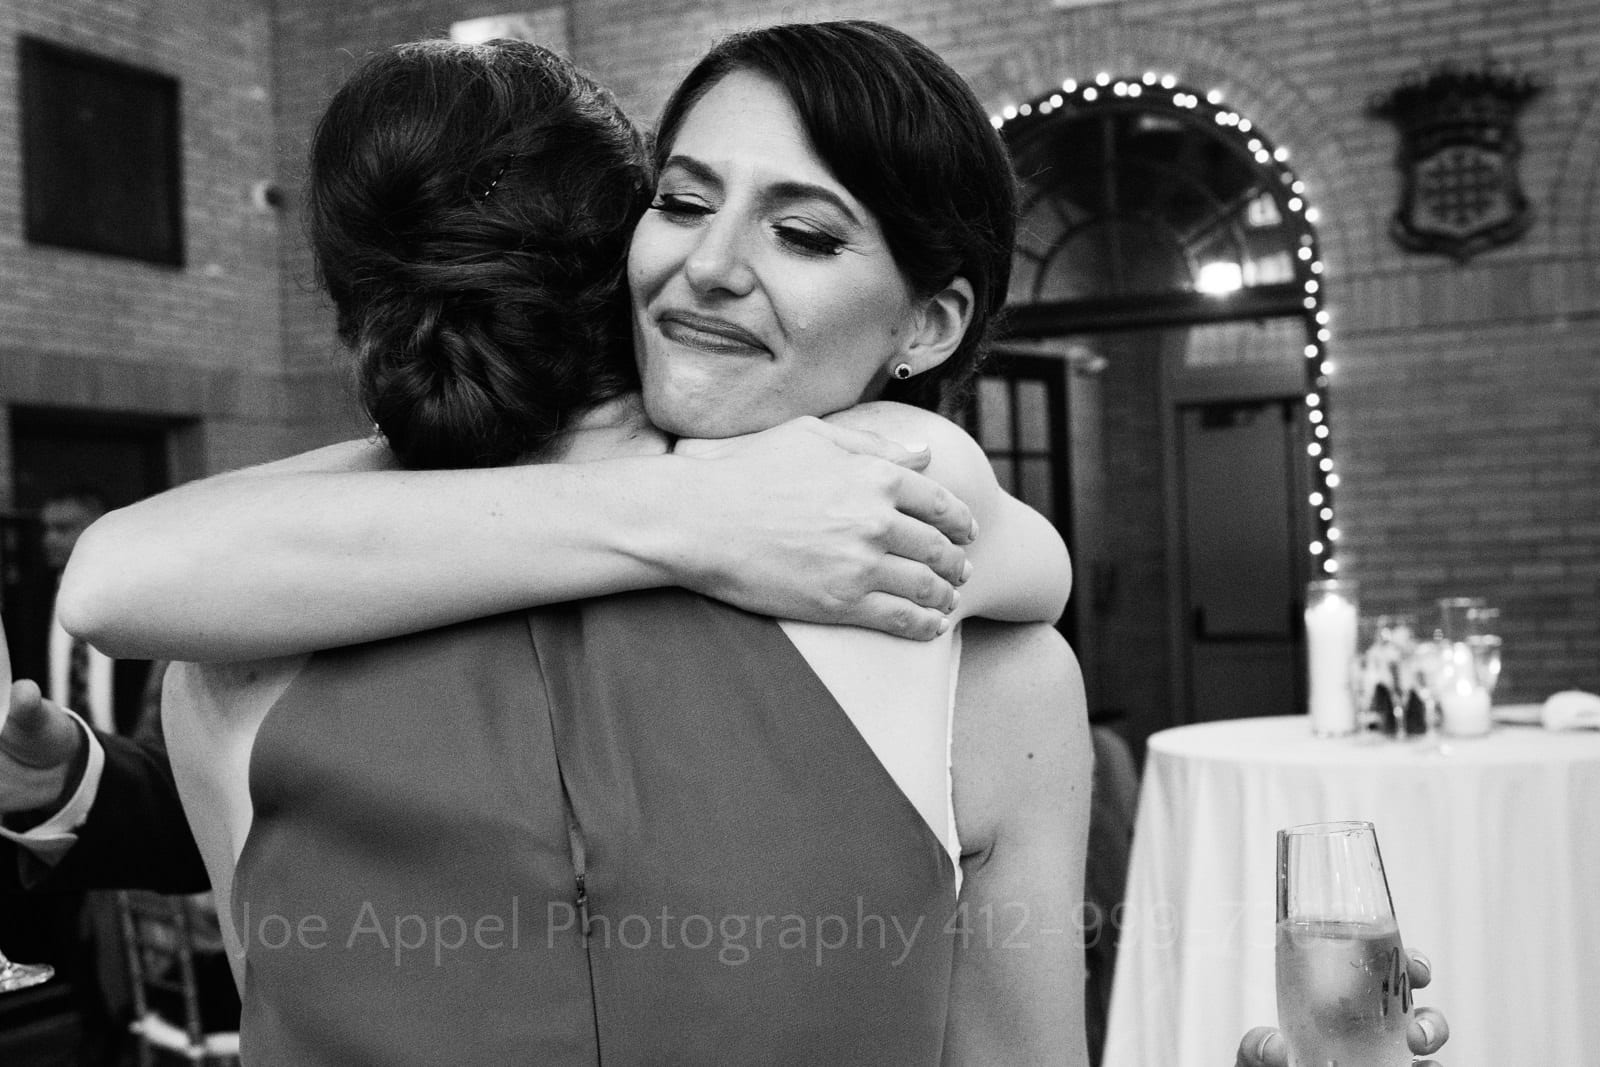 A tear falls down the cheek of a bride as she embraces her matron of honor after a toast at her St Francis Hall Washington DC wedding.